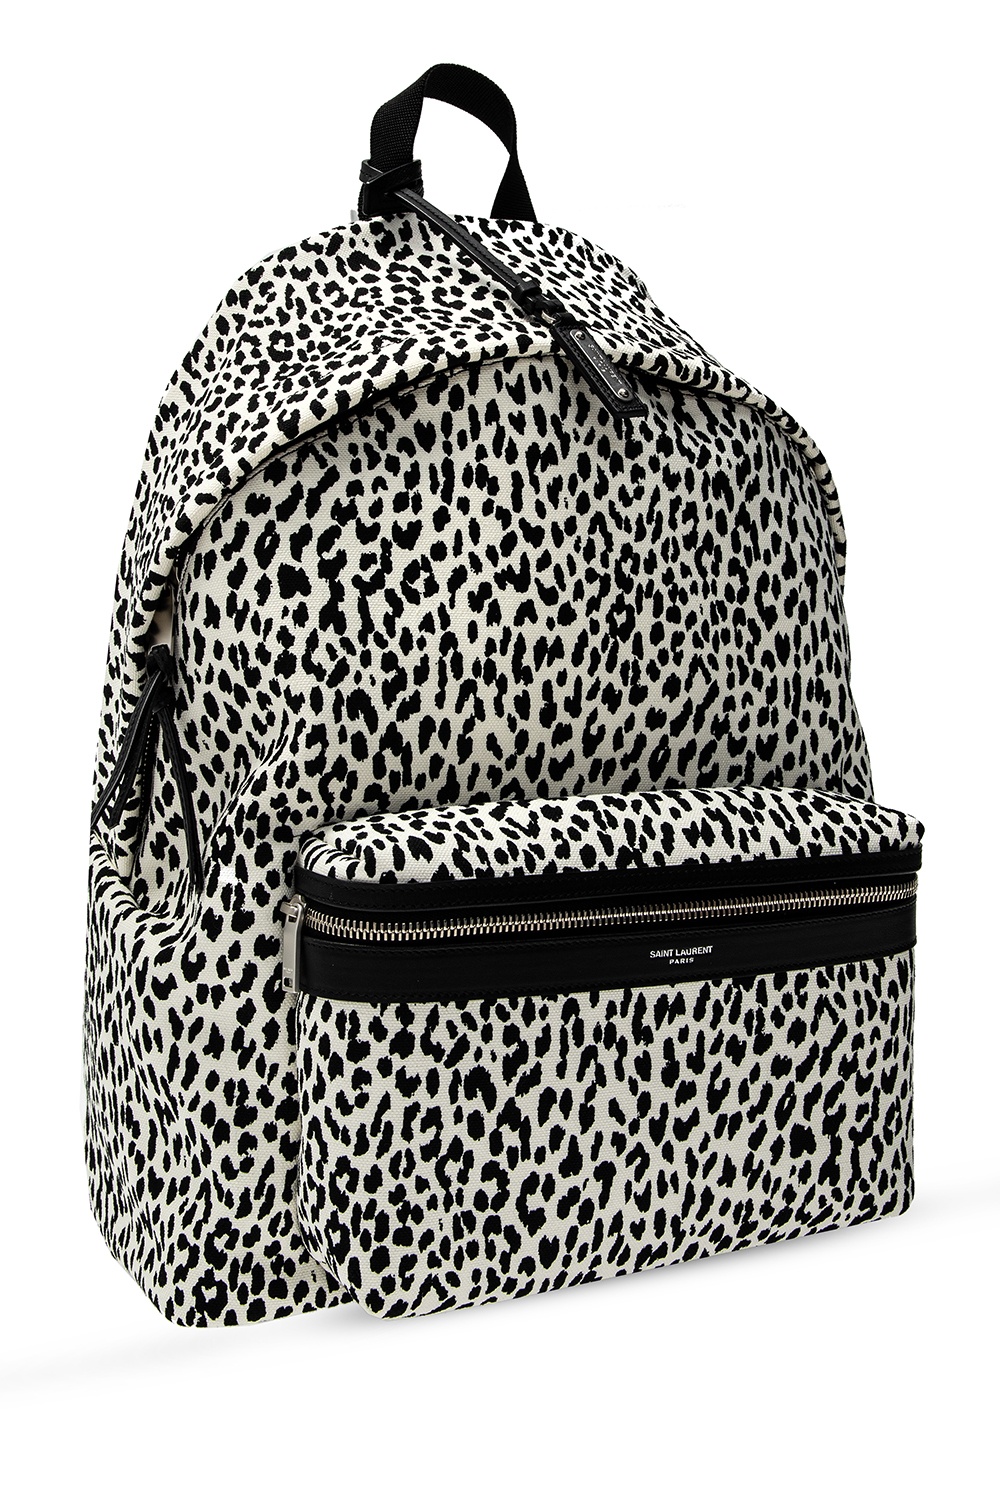 Saint Laurent ‘City’ backpack with print